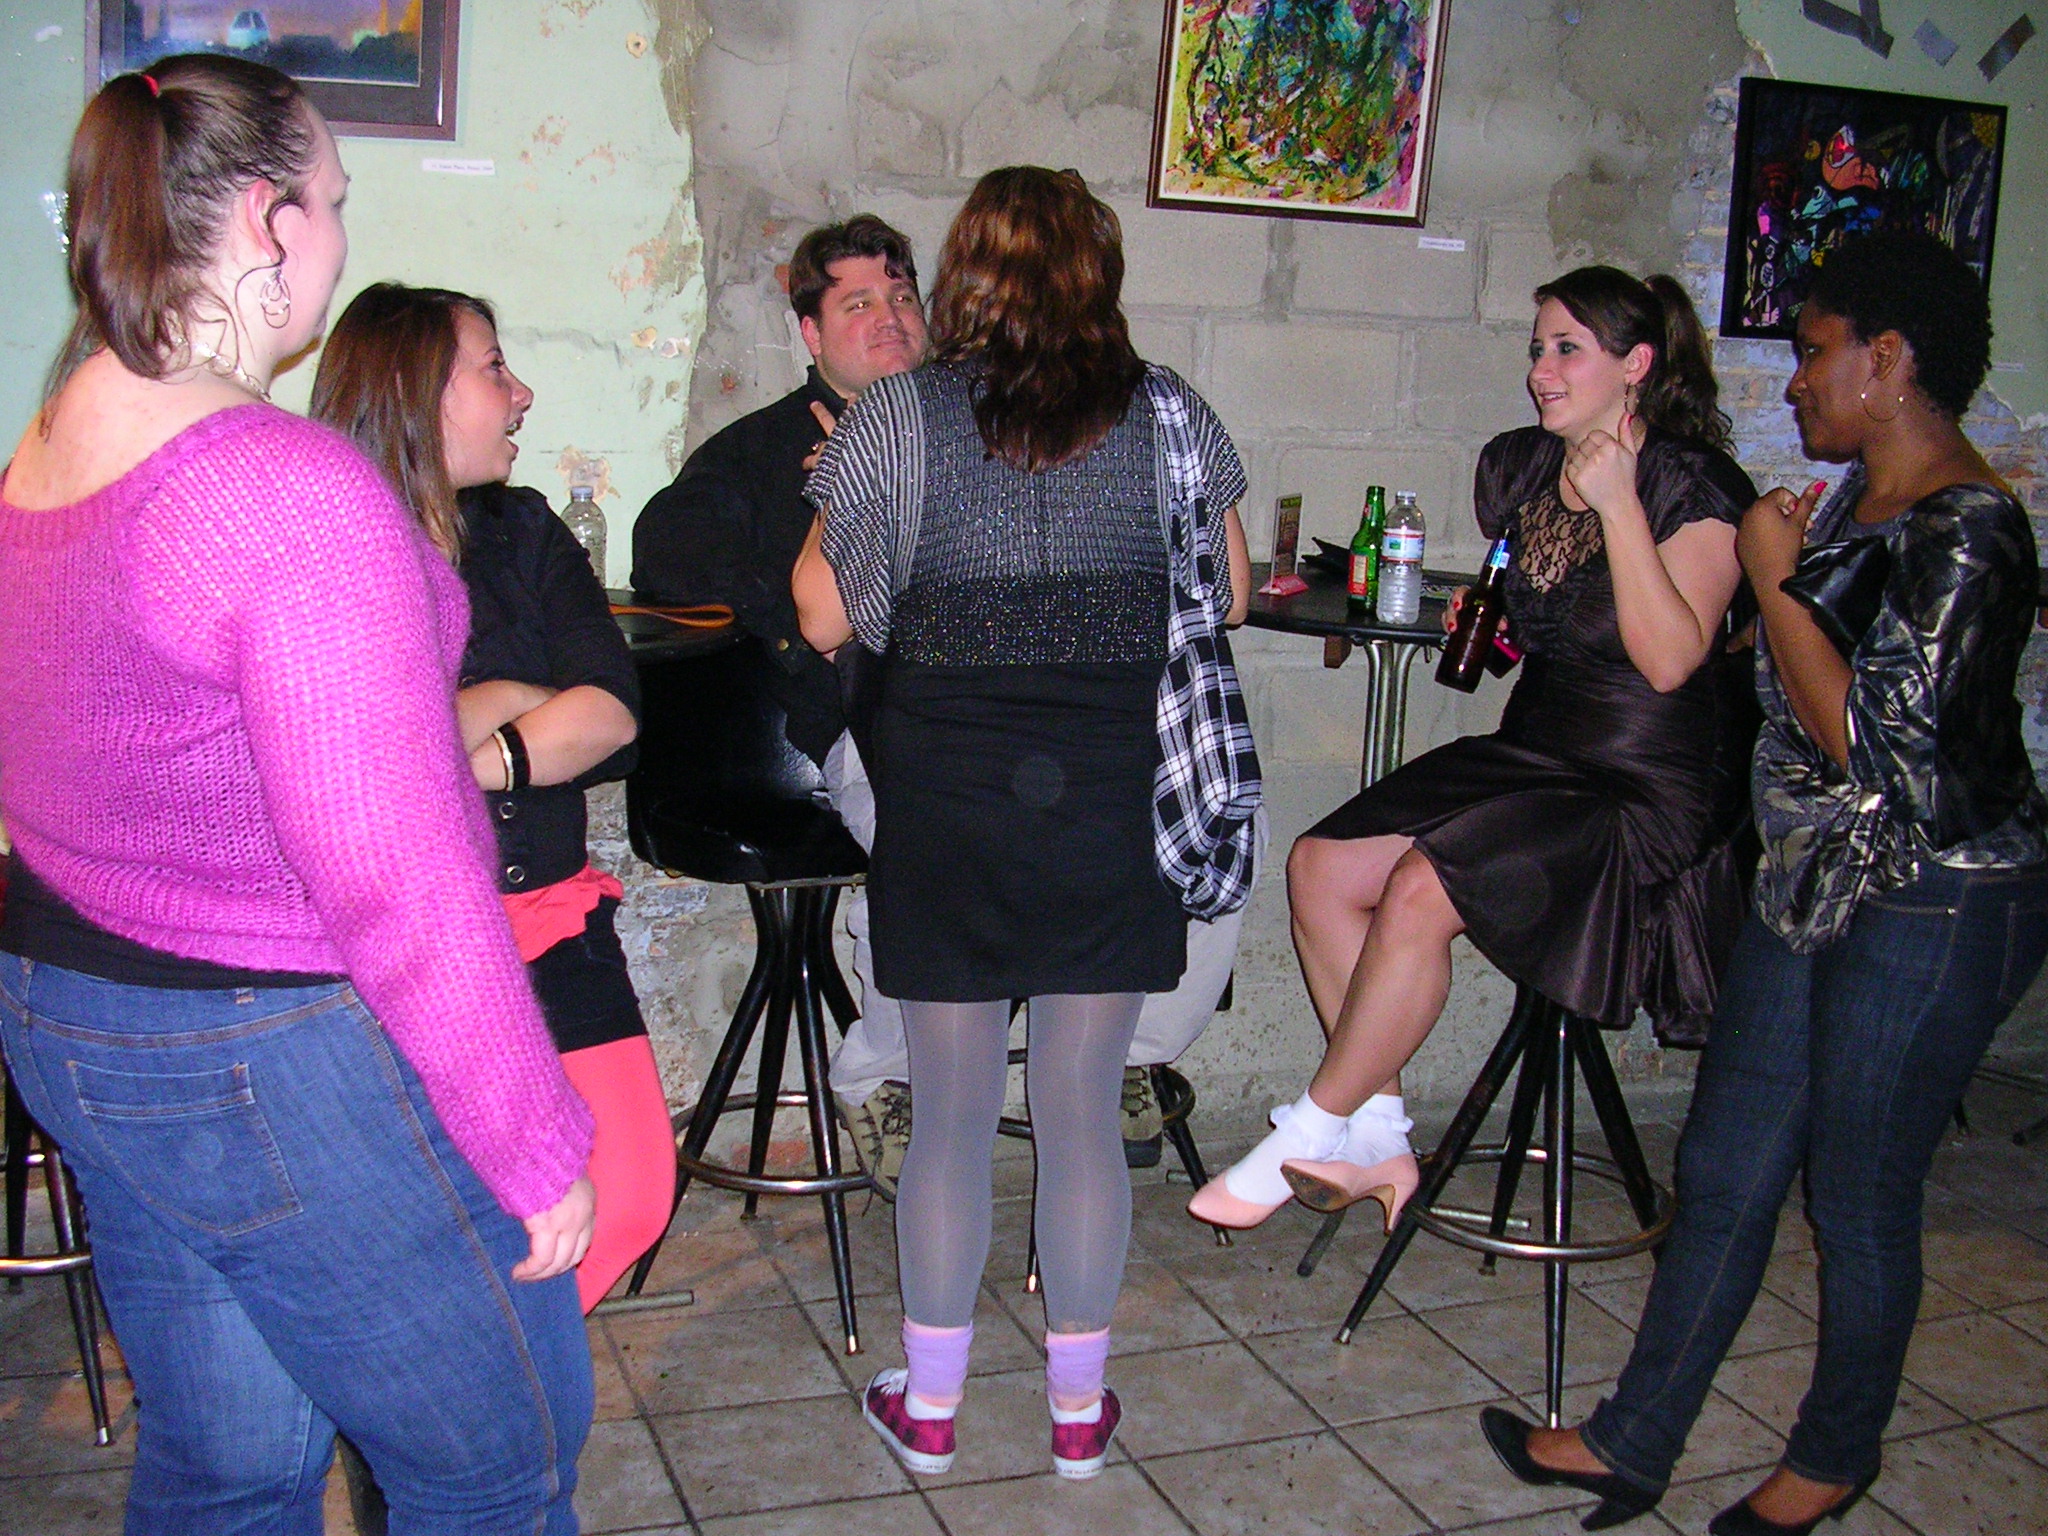 Friends gather to talk and dance at The Depot